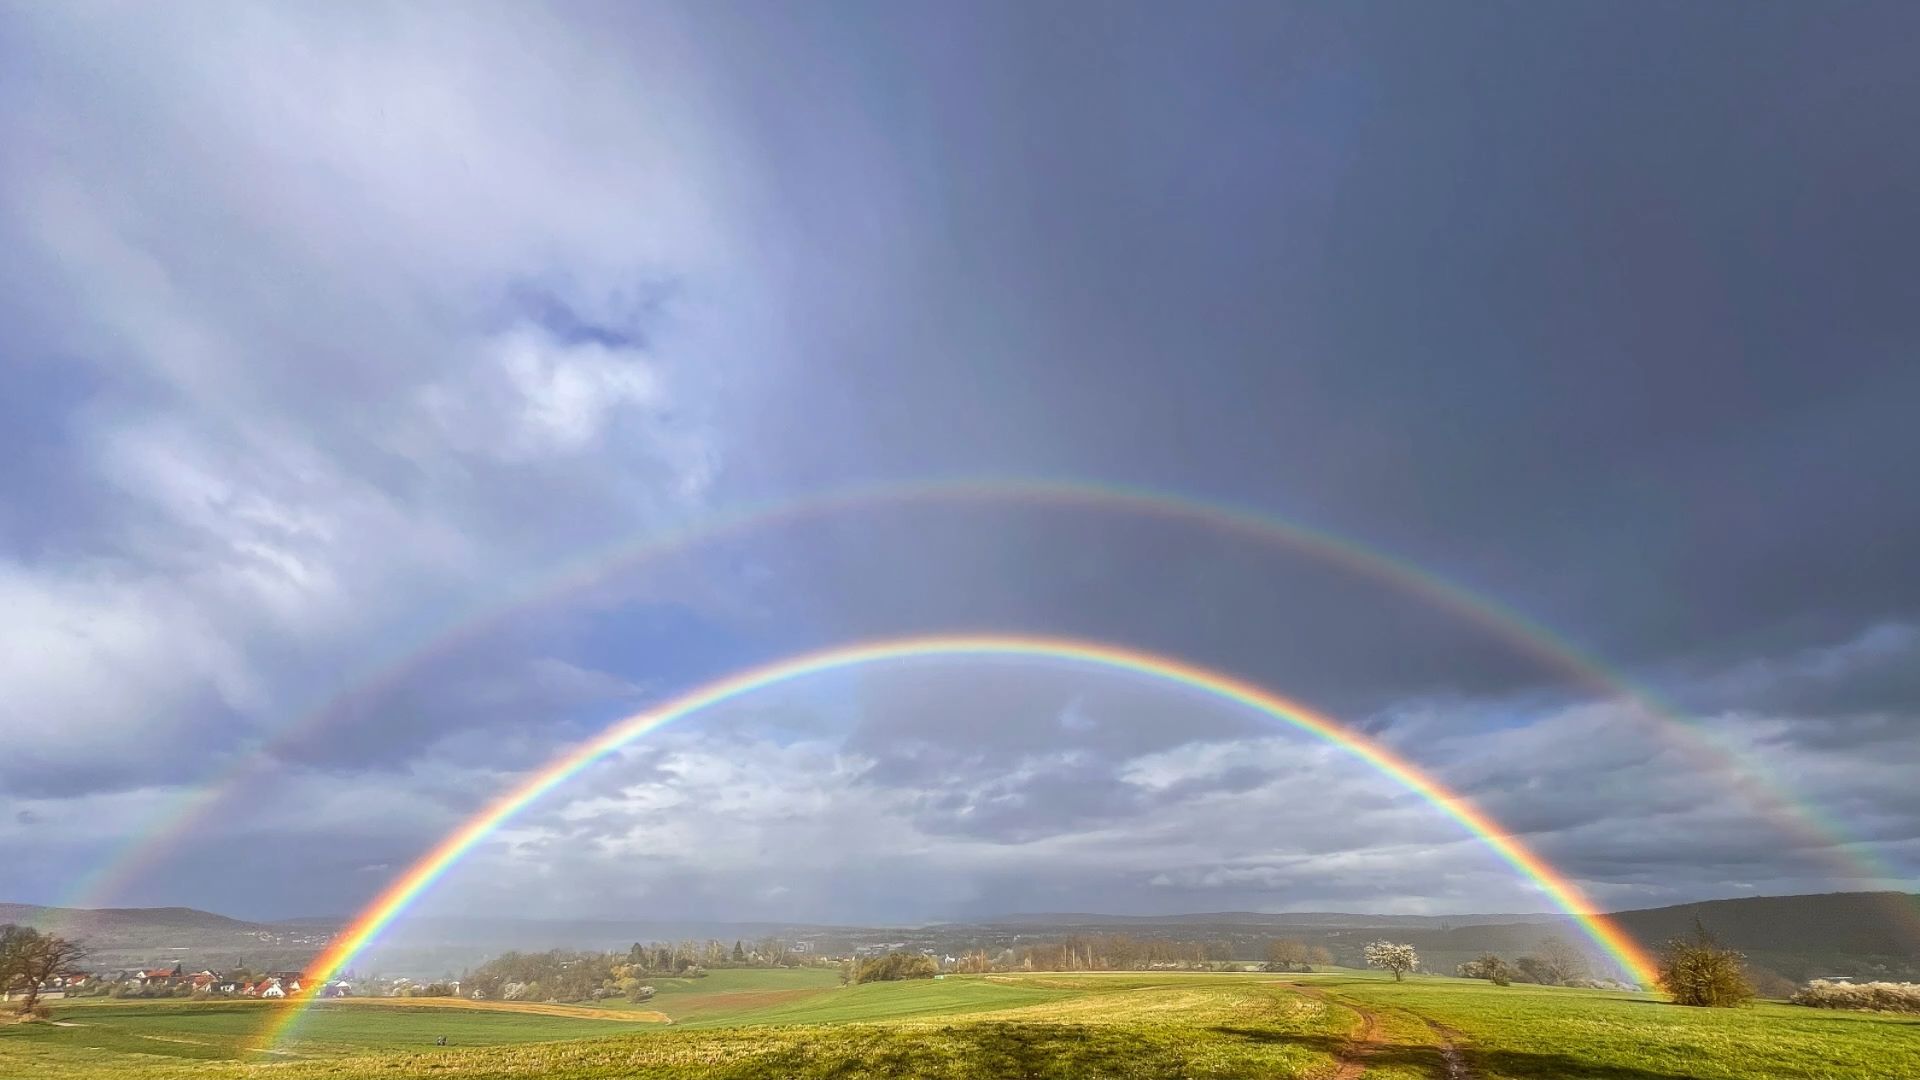 Rainbows over Bamberg: April weather creates a play of colors in the sky